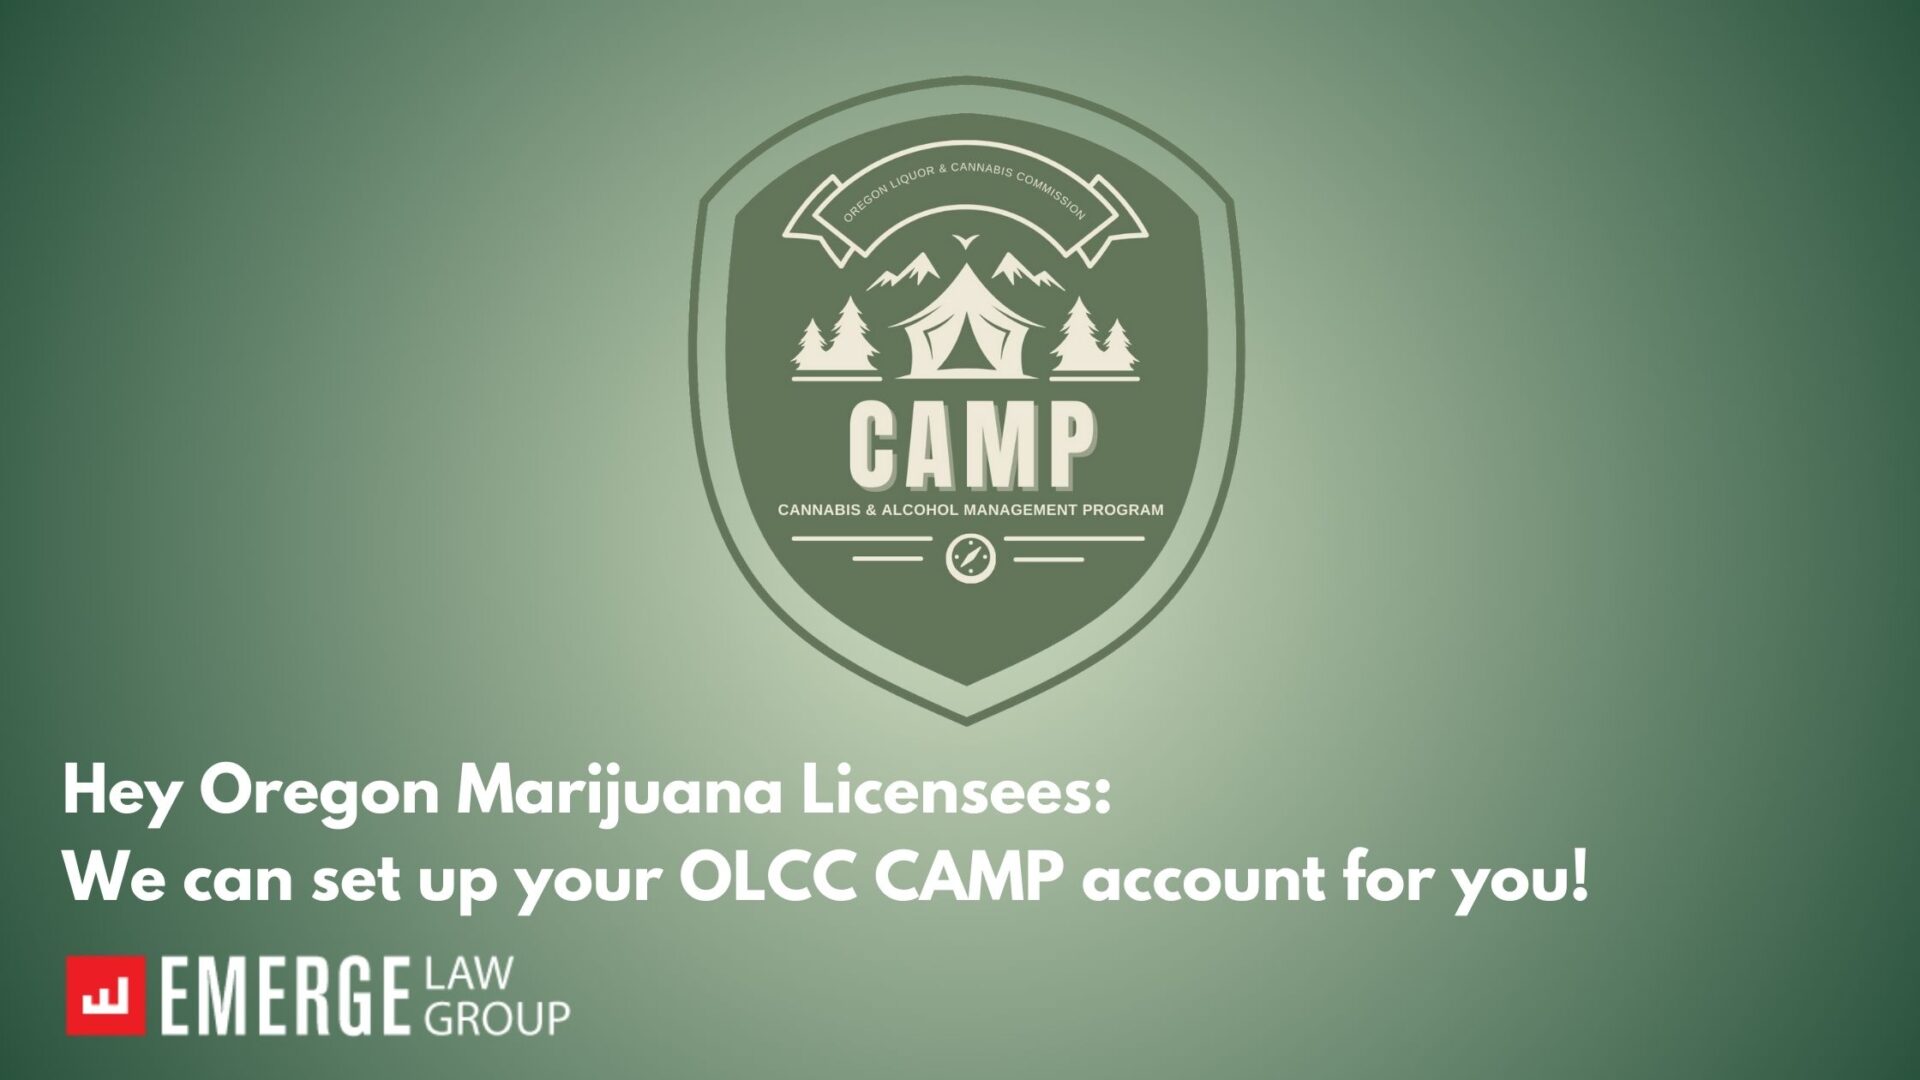 Hey Oregon Marijuana Licensees: We can set up your OLCC CAMP account for you!